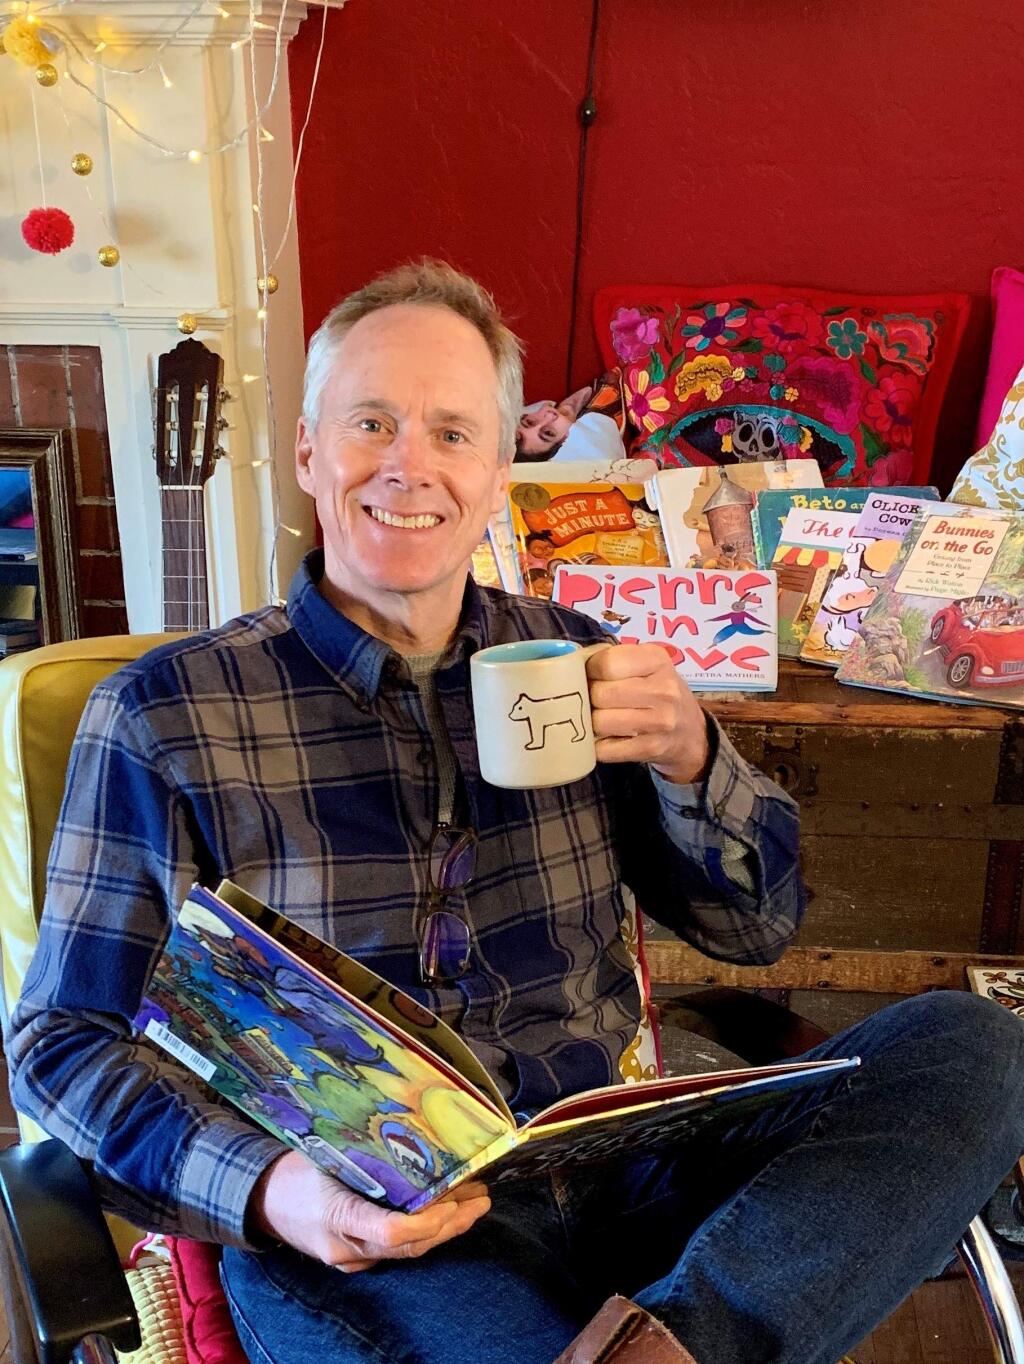 READY TO READ: Petaluma's Barton Smith, with book and cup of tea, preparing to read a story as part of his nightly Bedtime Stories with Barton broadcast on Facebook Live.